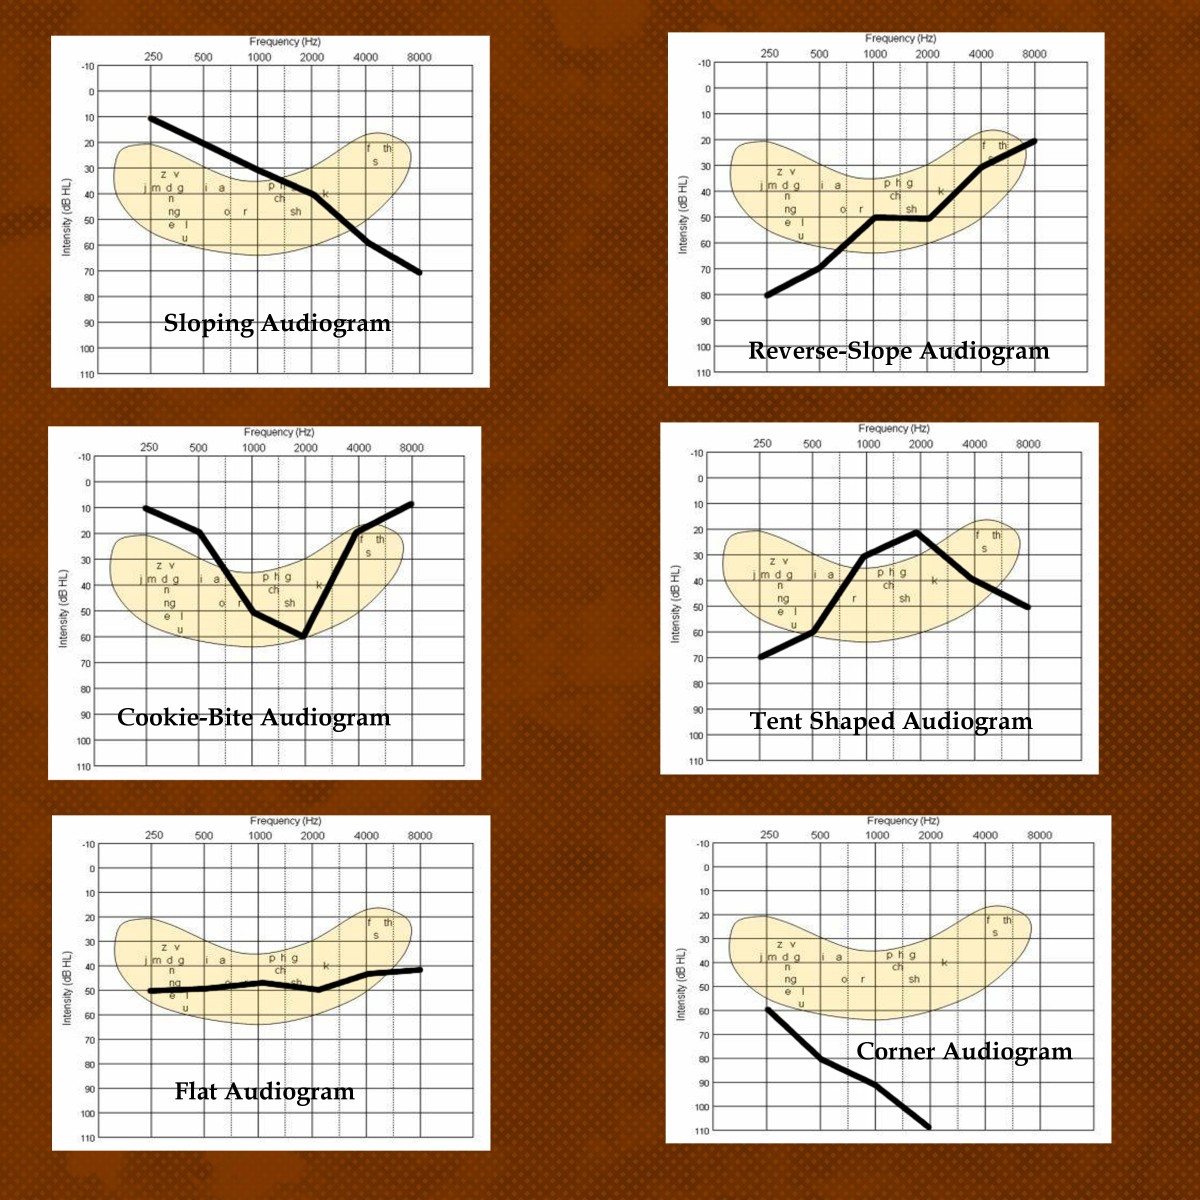 The various types of audiograms (click to enlarge).